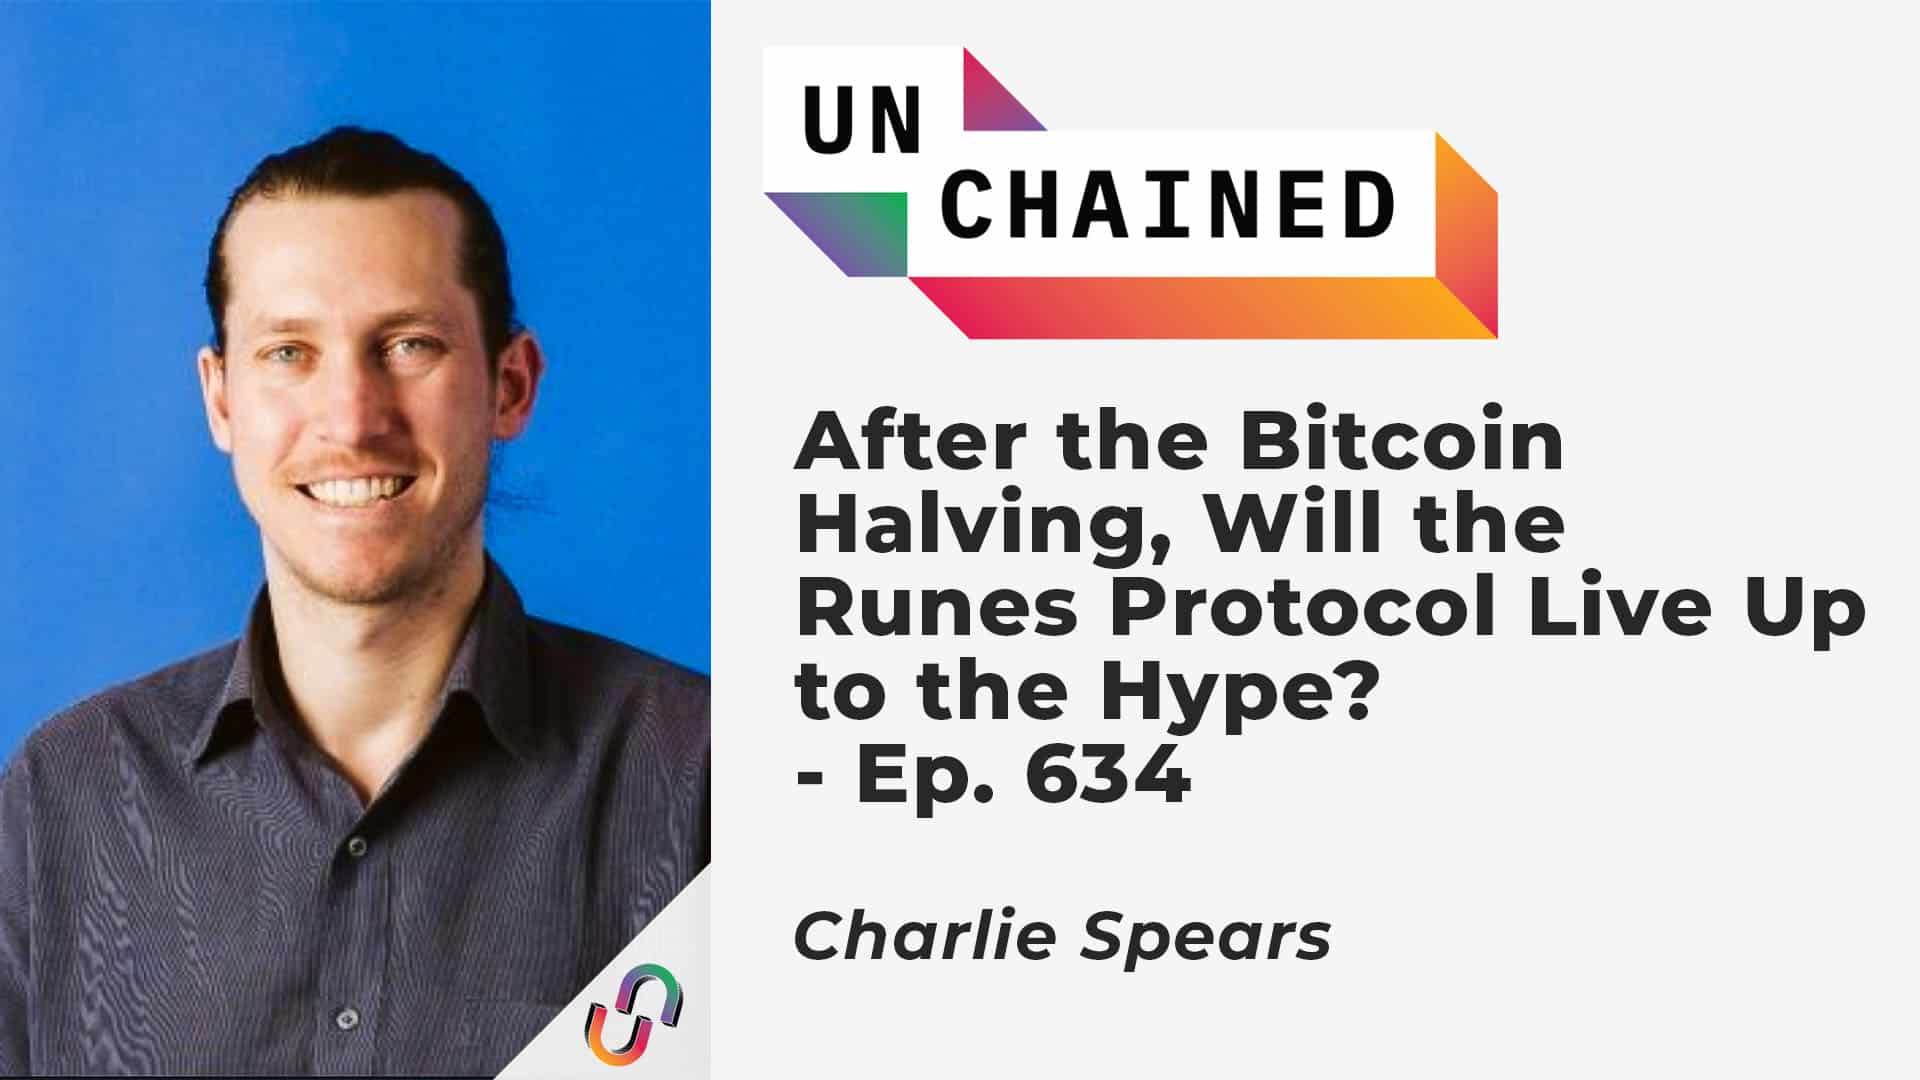 After the Bitcoin Halving, Will the Runes Protocol Live Up to the Hype? - Ep. 634